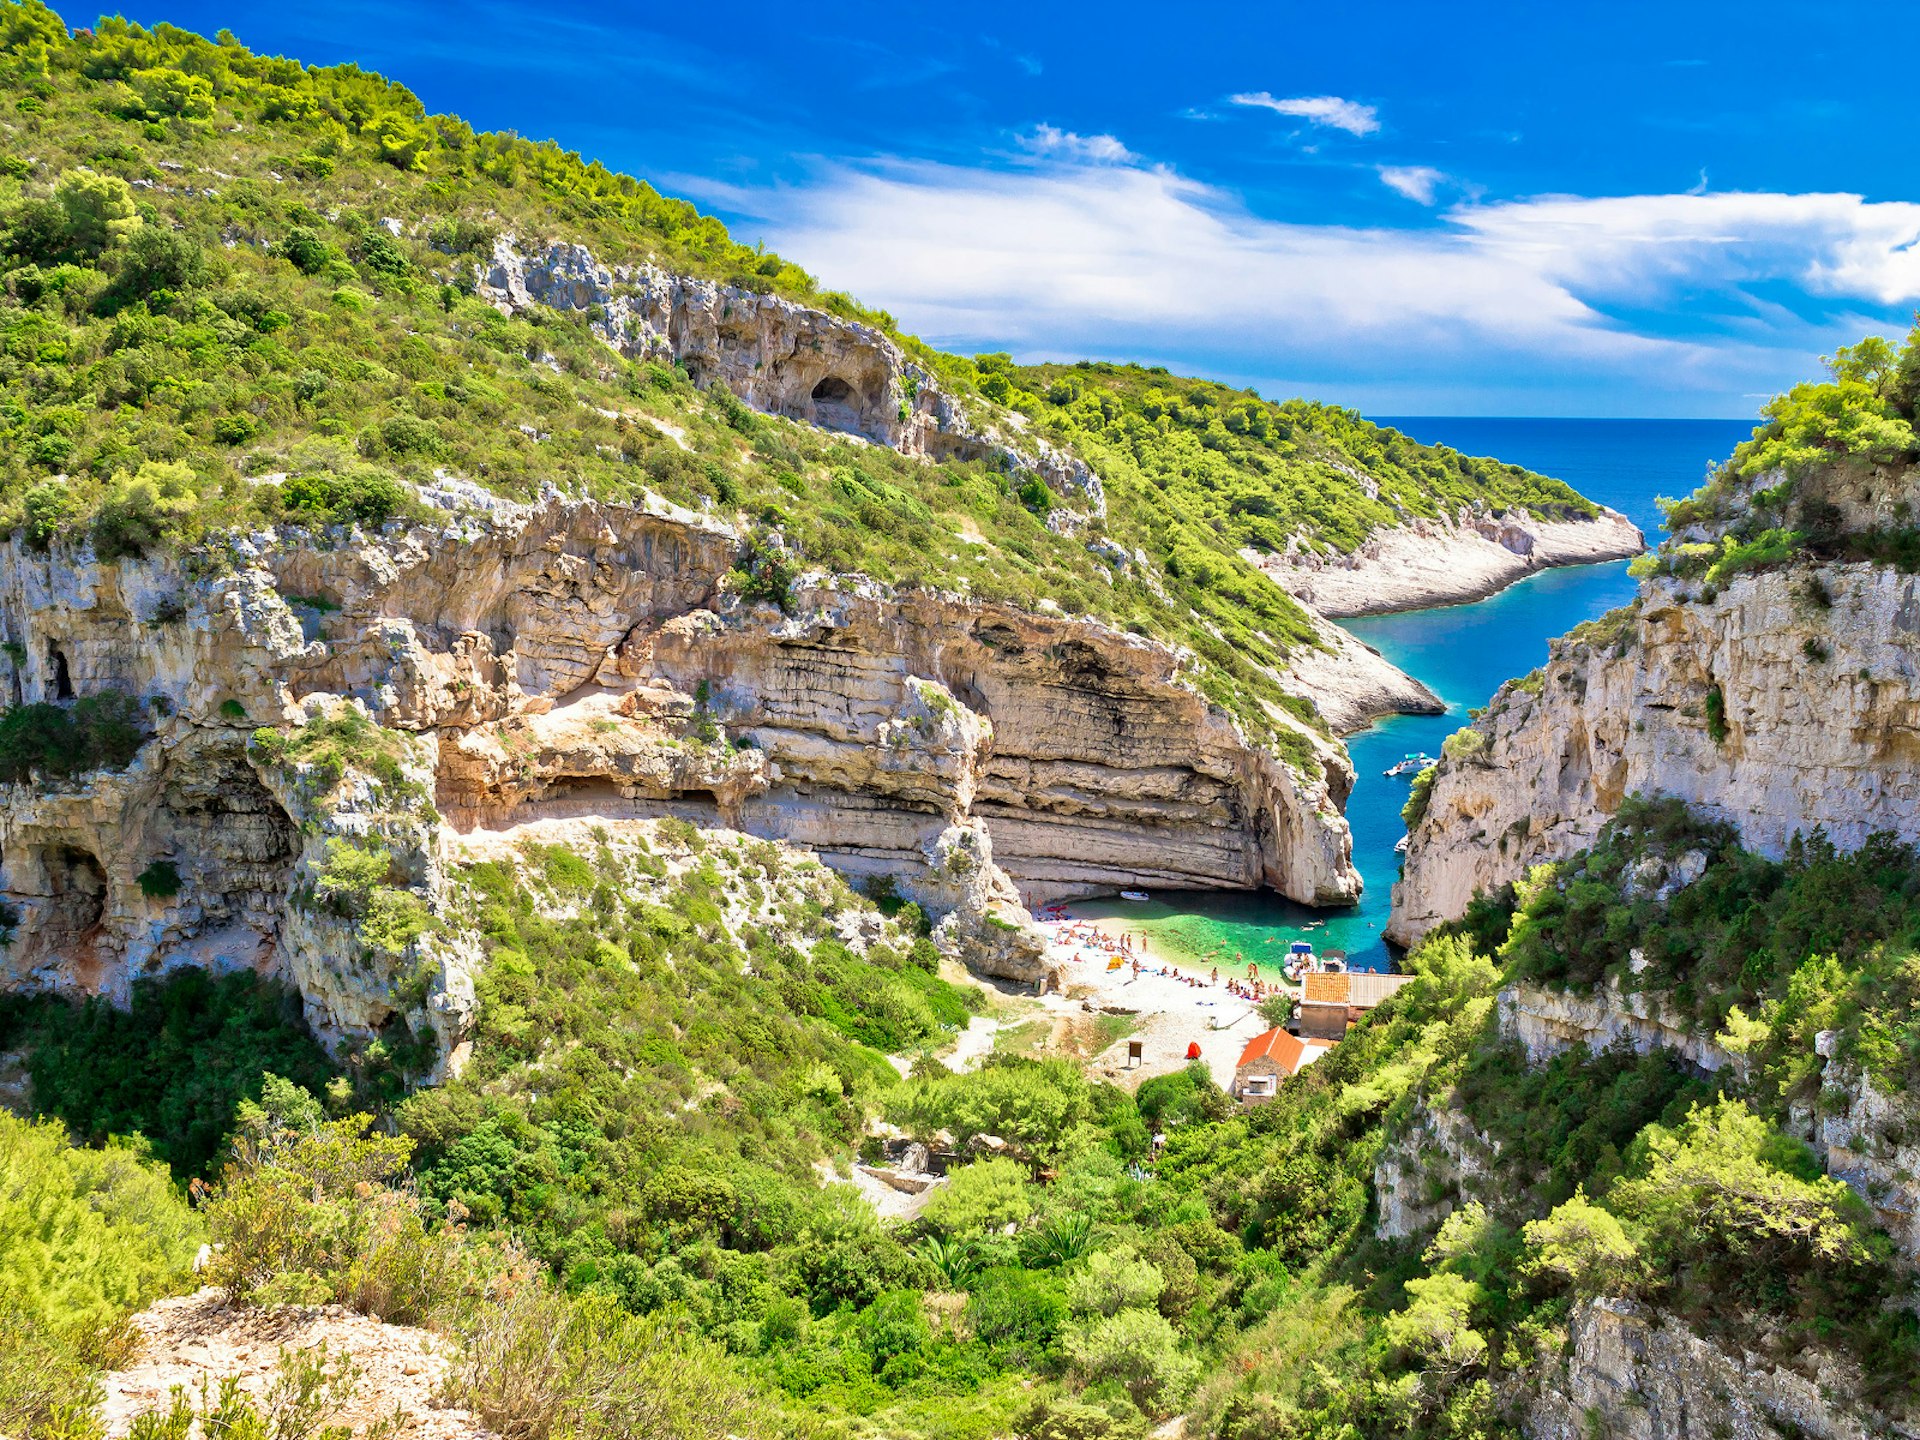 The secluded Stiniva beach on the island of Vis